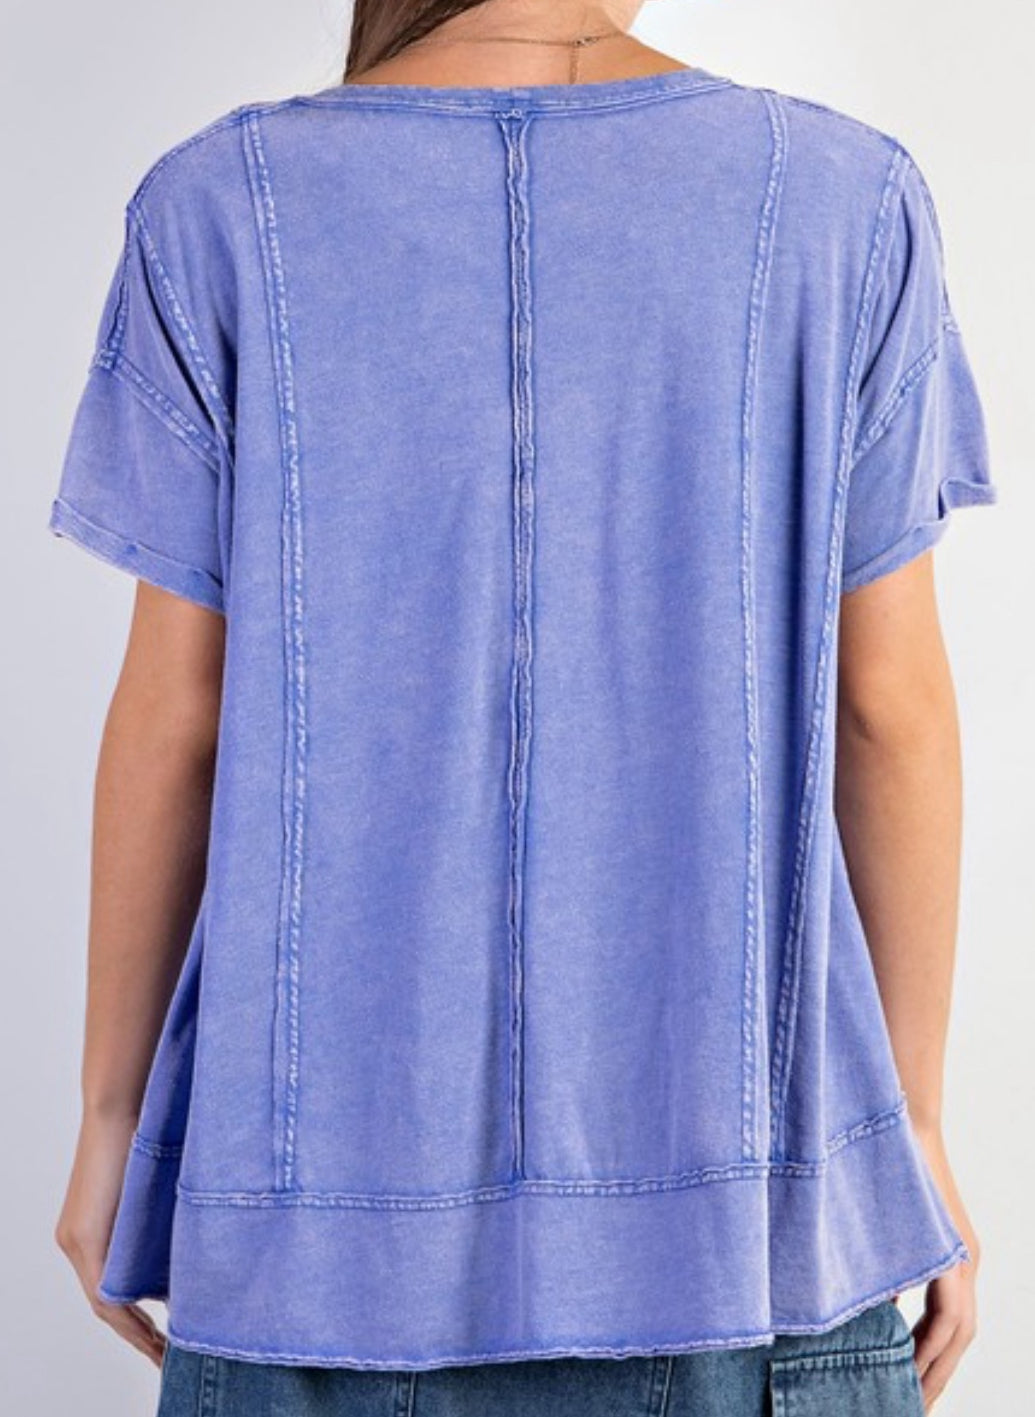 Periwinkle and pink loose fit tees with seam detail